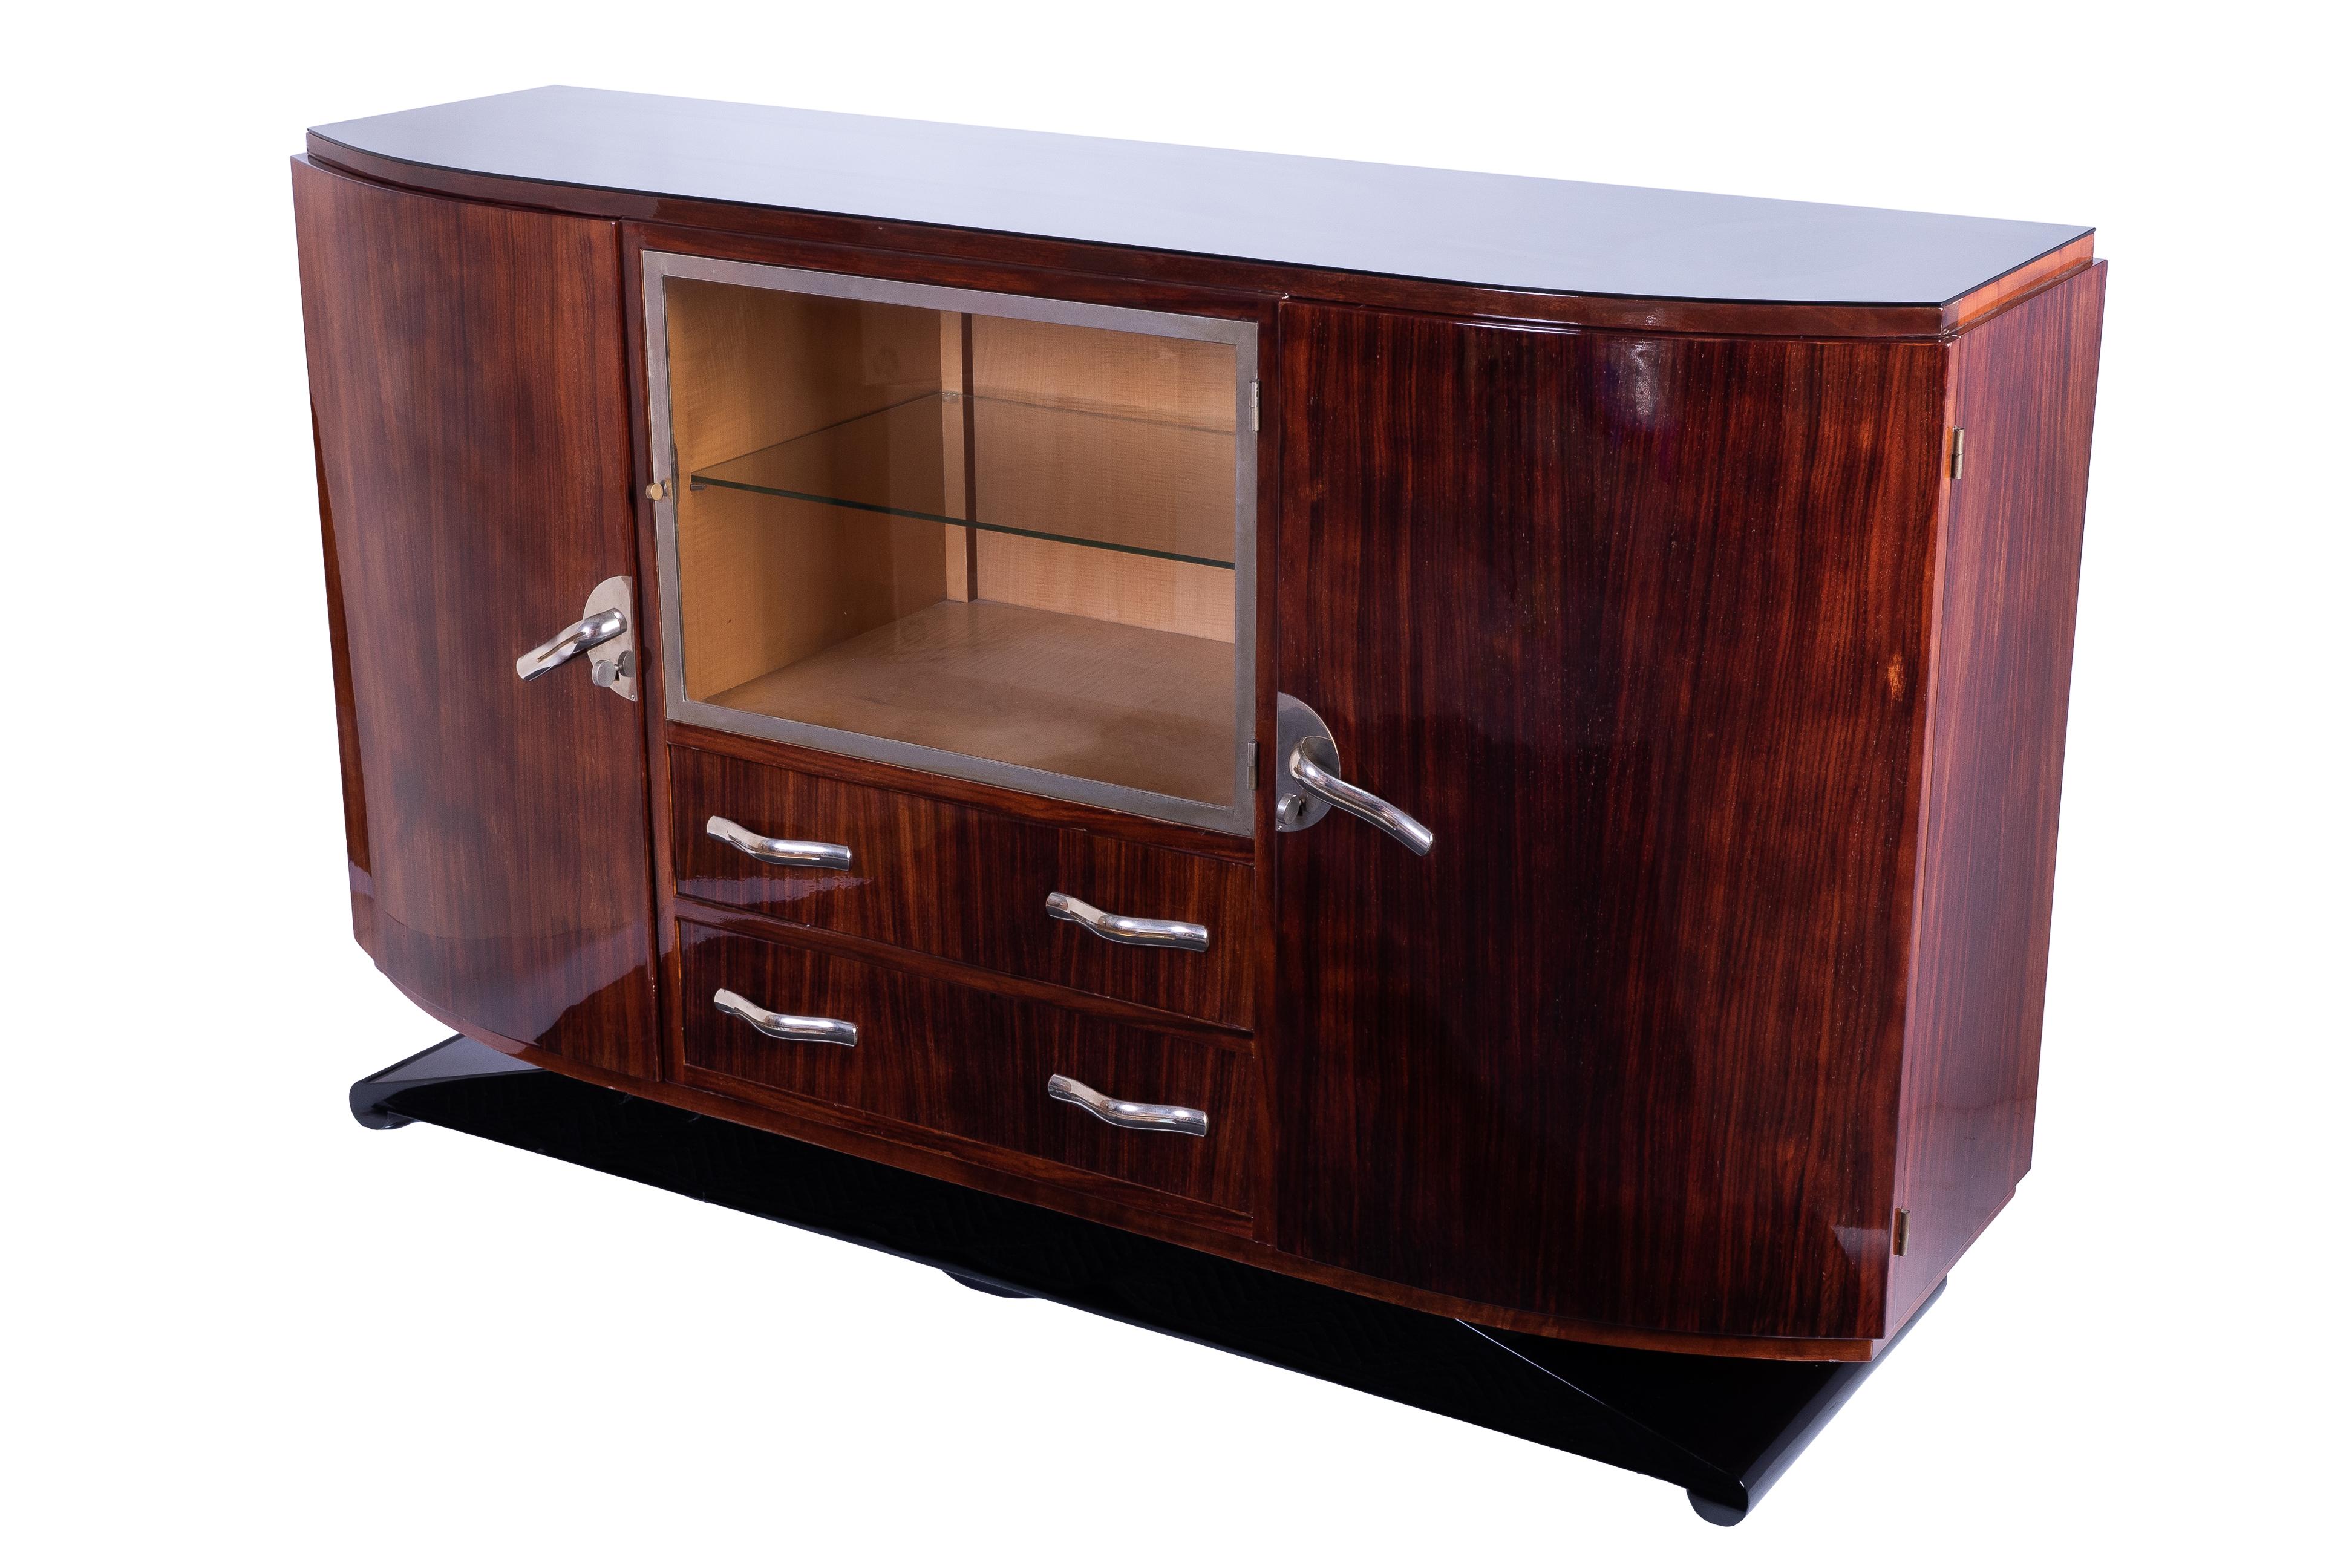 Luxe Art Deco sideboard / credenza / showcase featuring a solid mahogany frame veneered in luxurious light walnut and finished in a high gloss lacquer. The piece has two single side doors, one center display and two center drawers. Plenty of